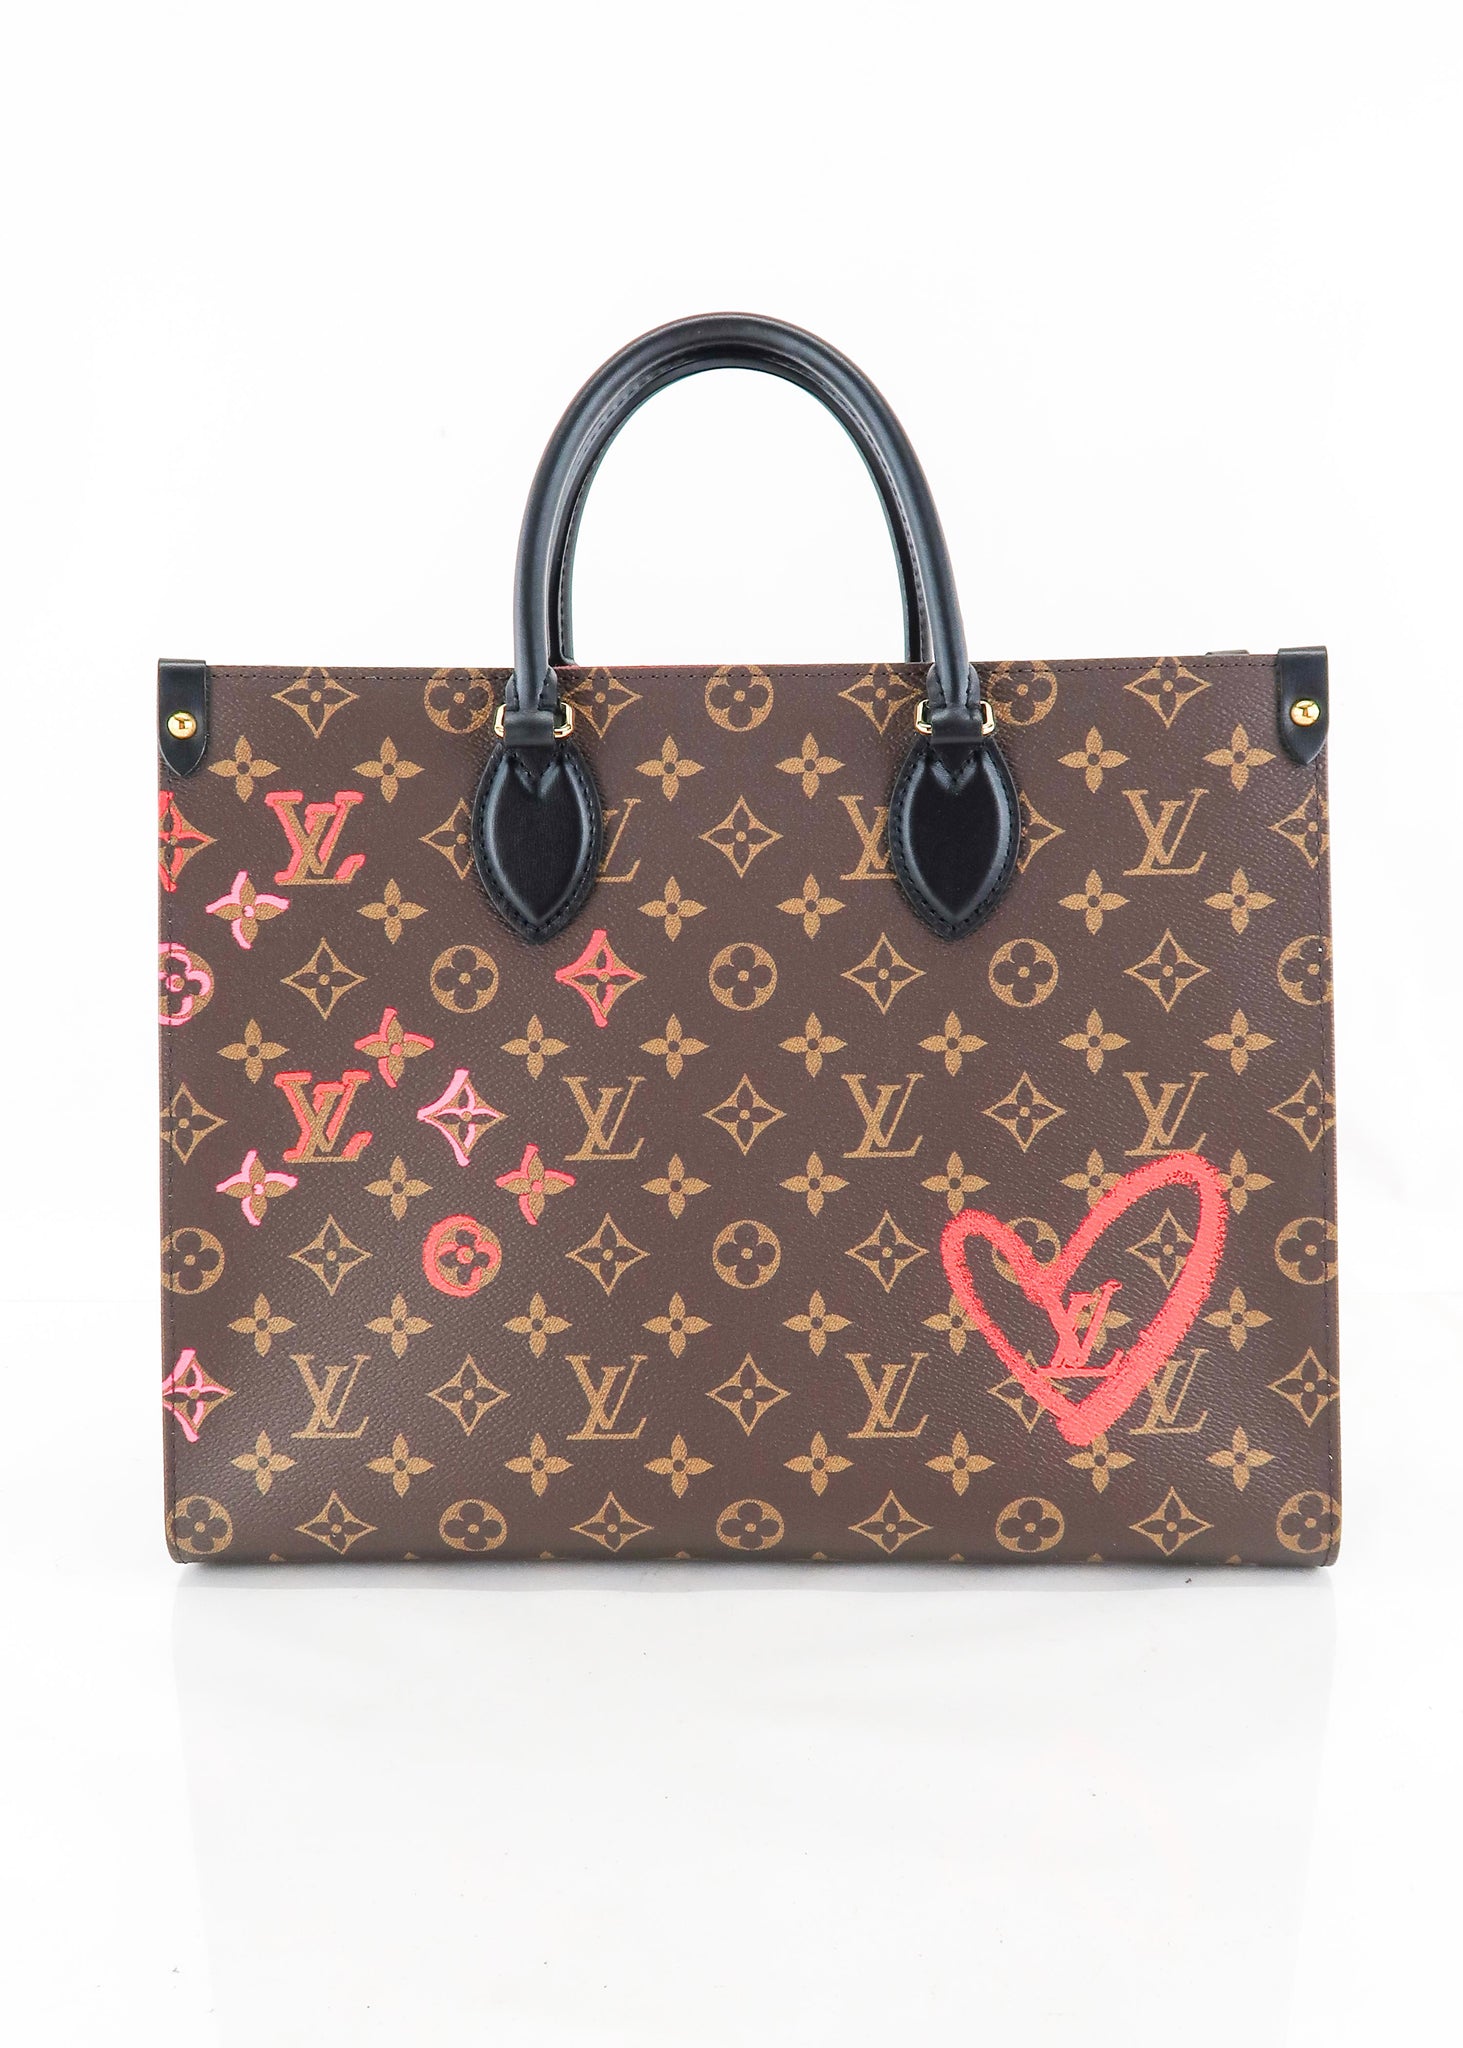 louis vuitton onthego mm - Google Search